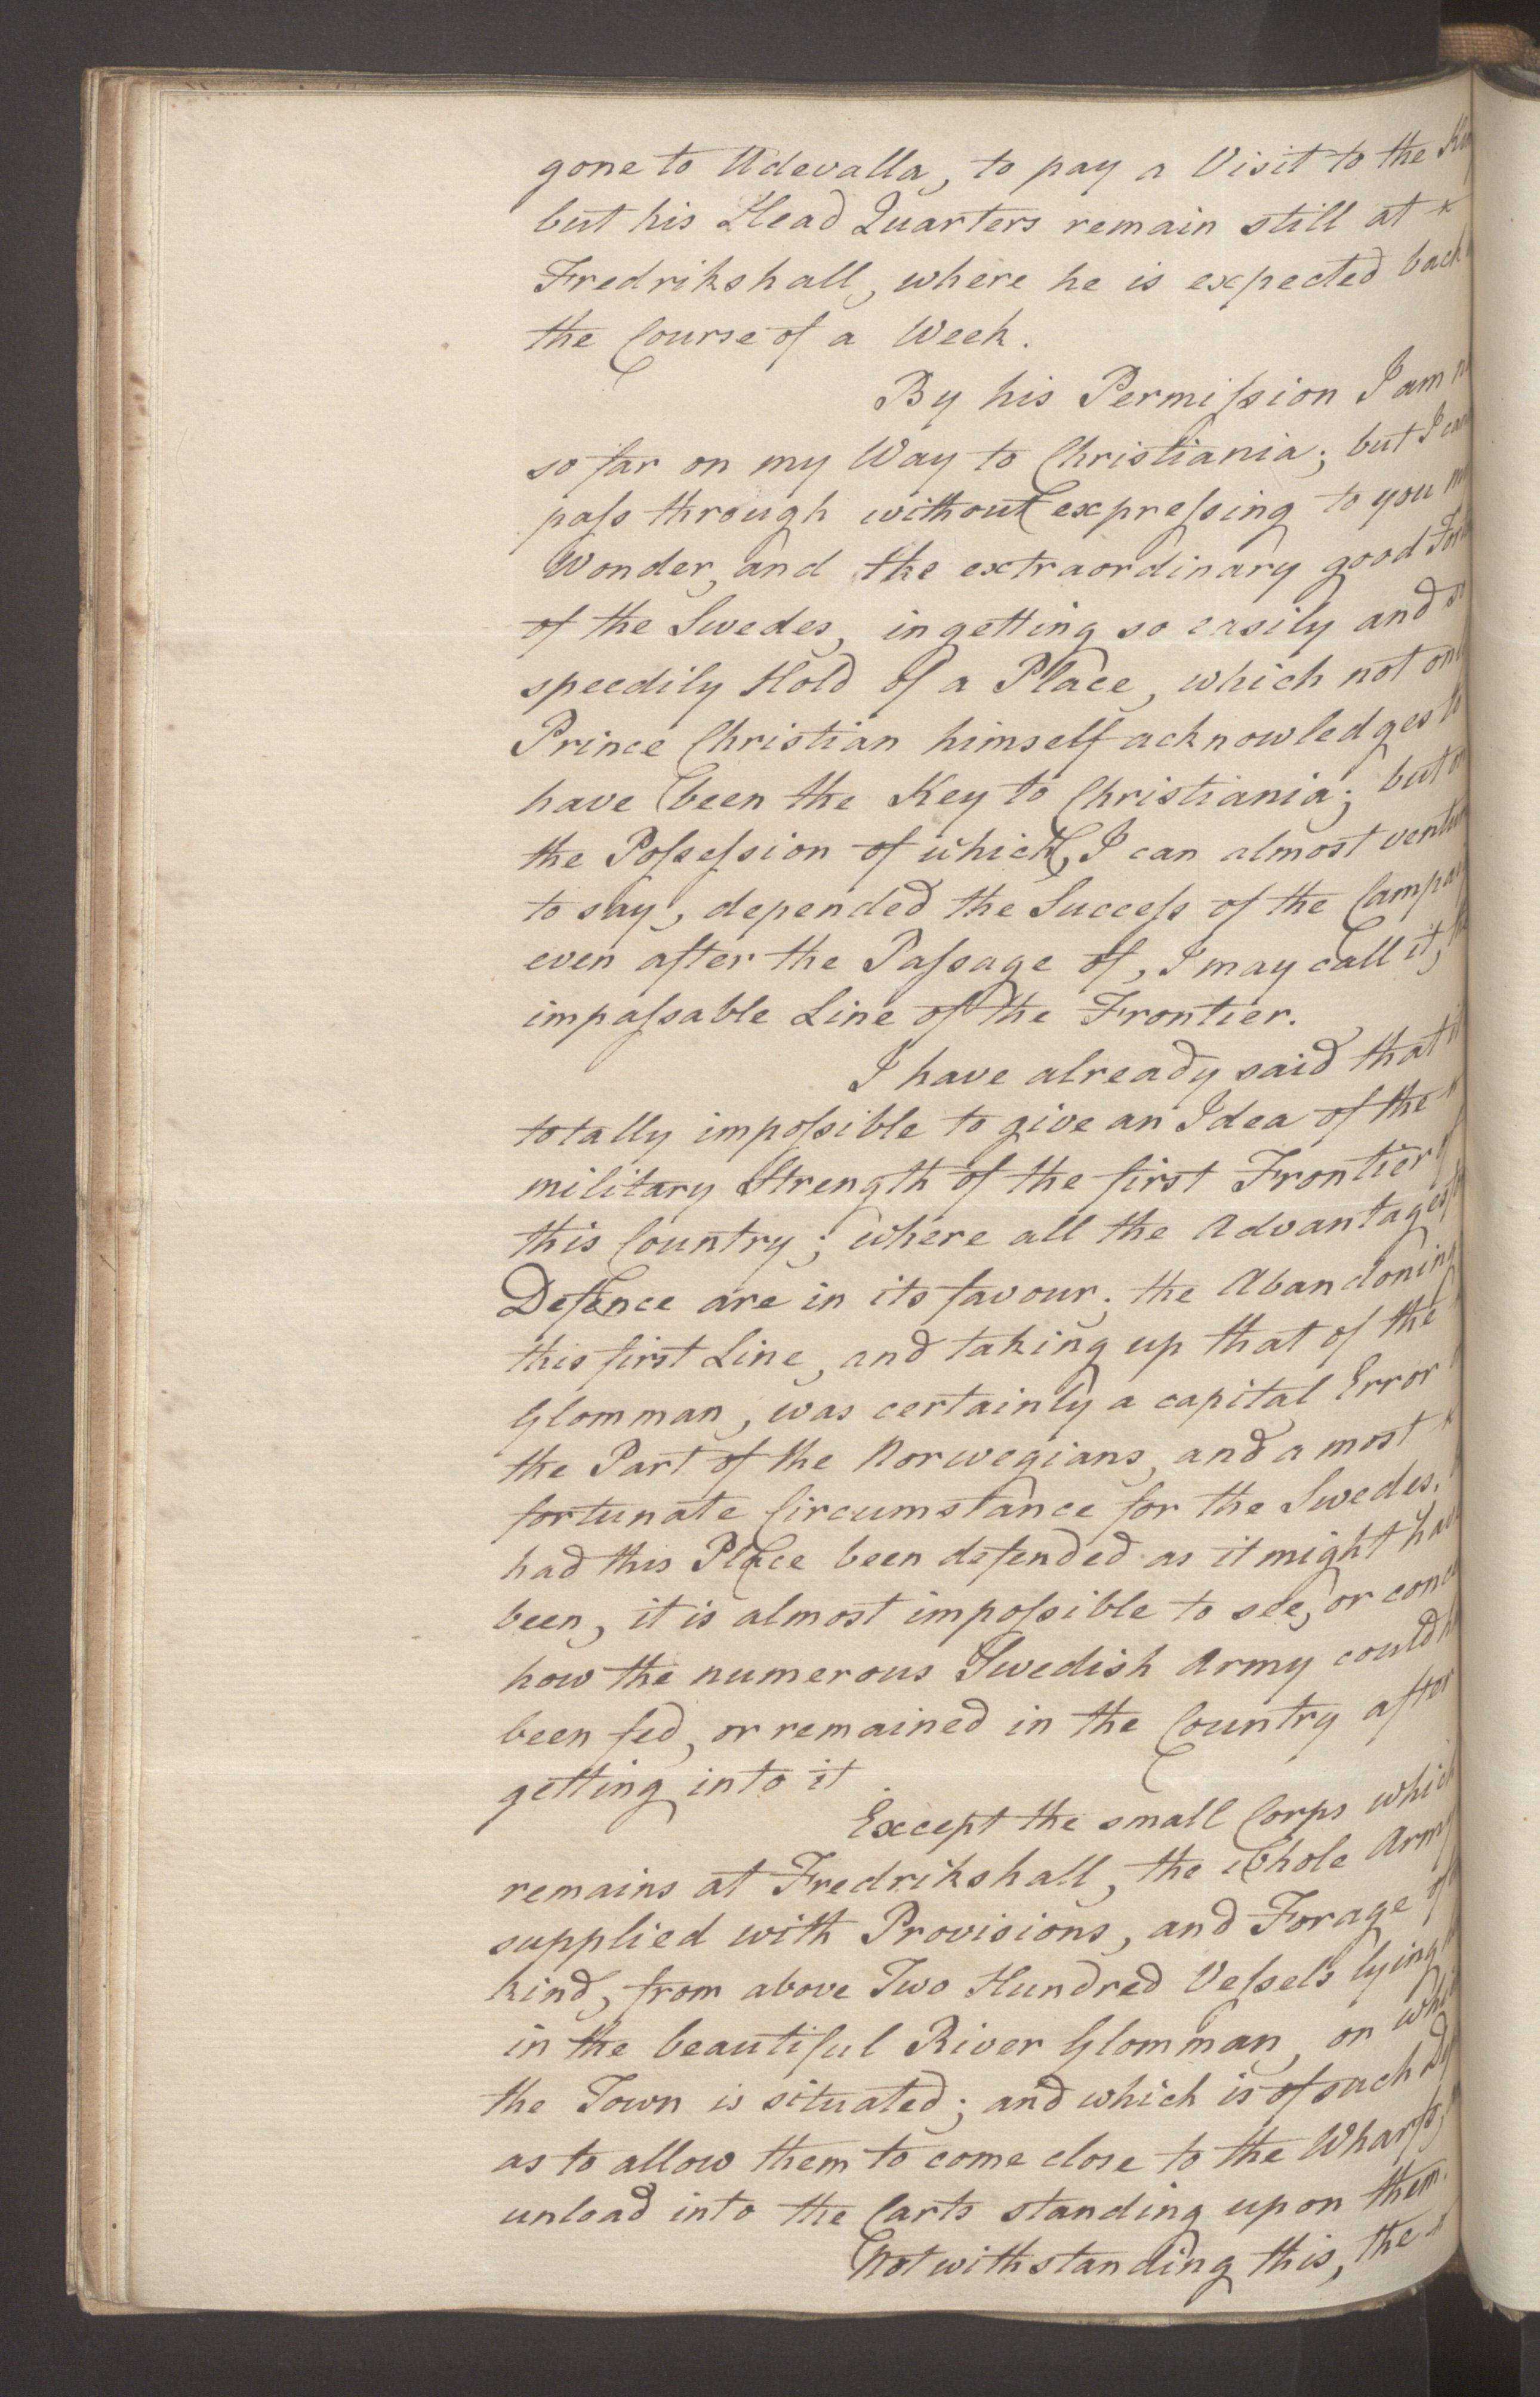 Foreign Office*, UKA/-/FO 38/16: Sir C. Gordon. Reports from Malmö, Jonkoping, and Helsingborg, 1814, p. 104